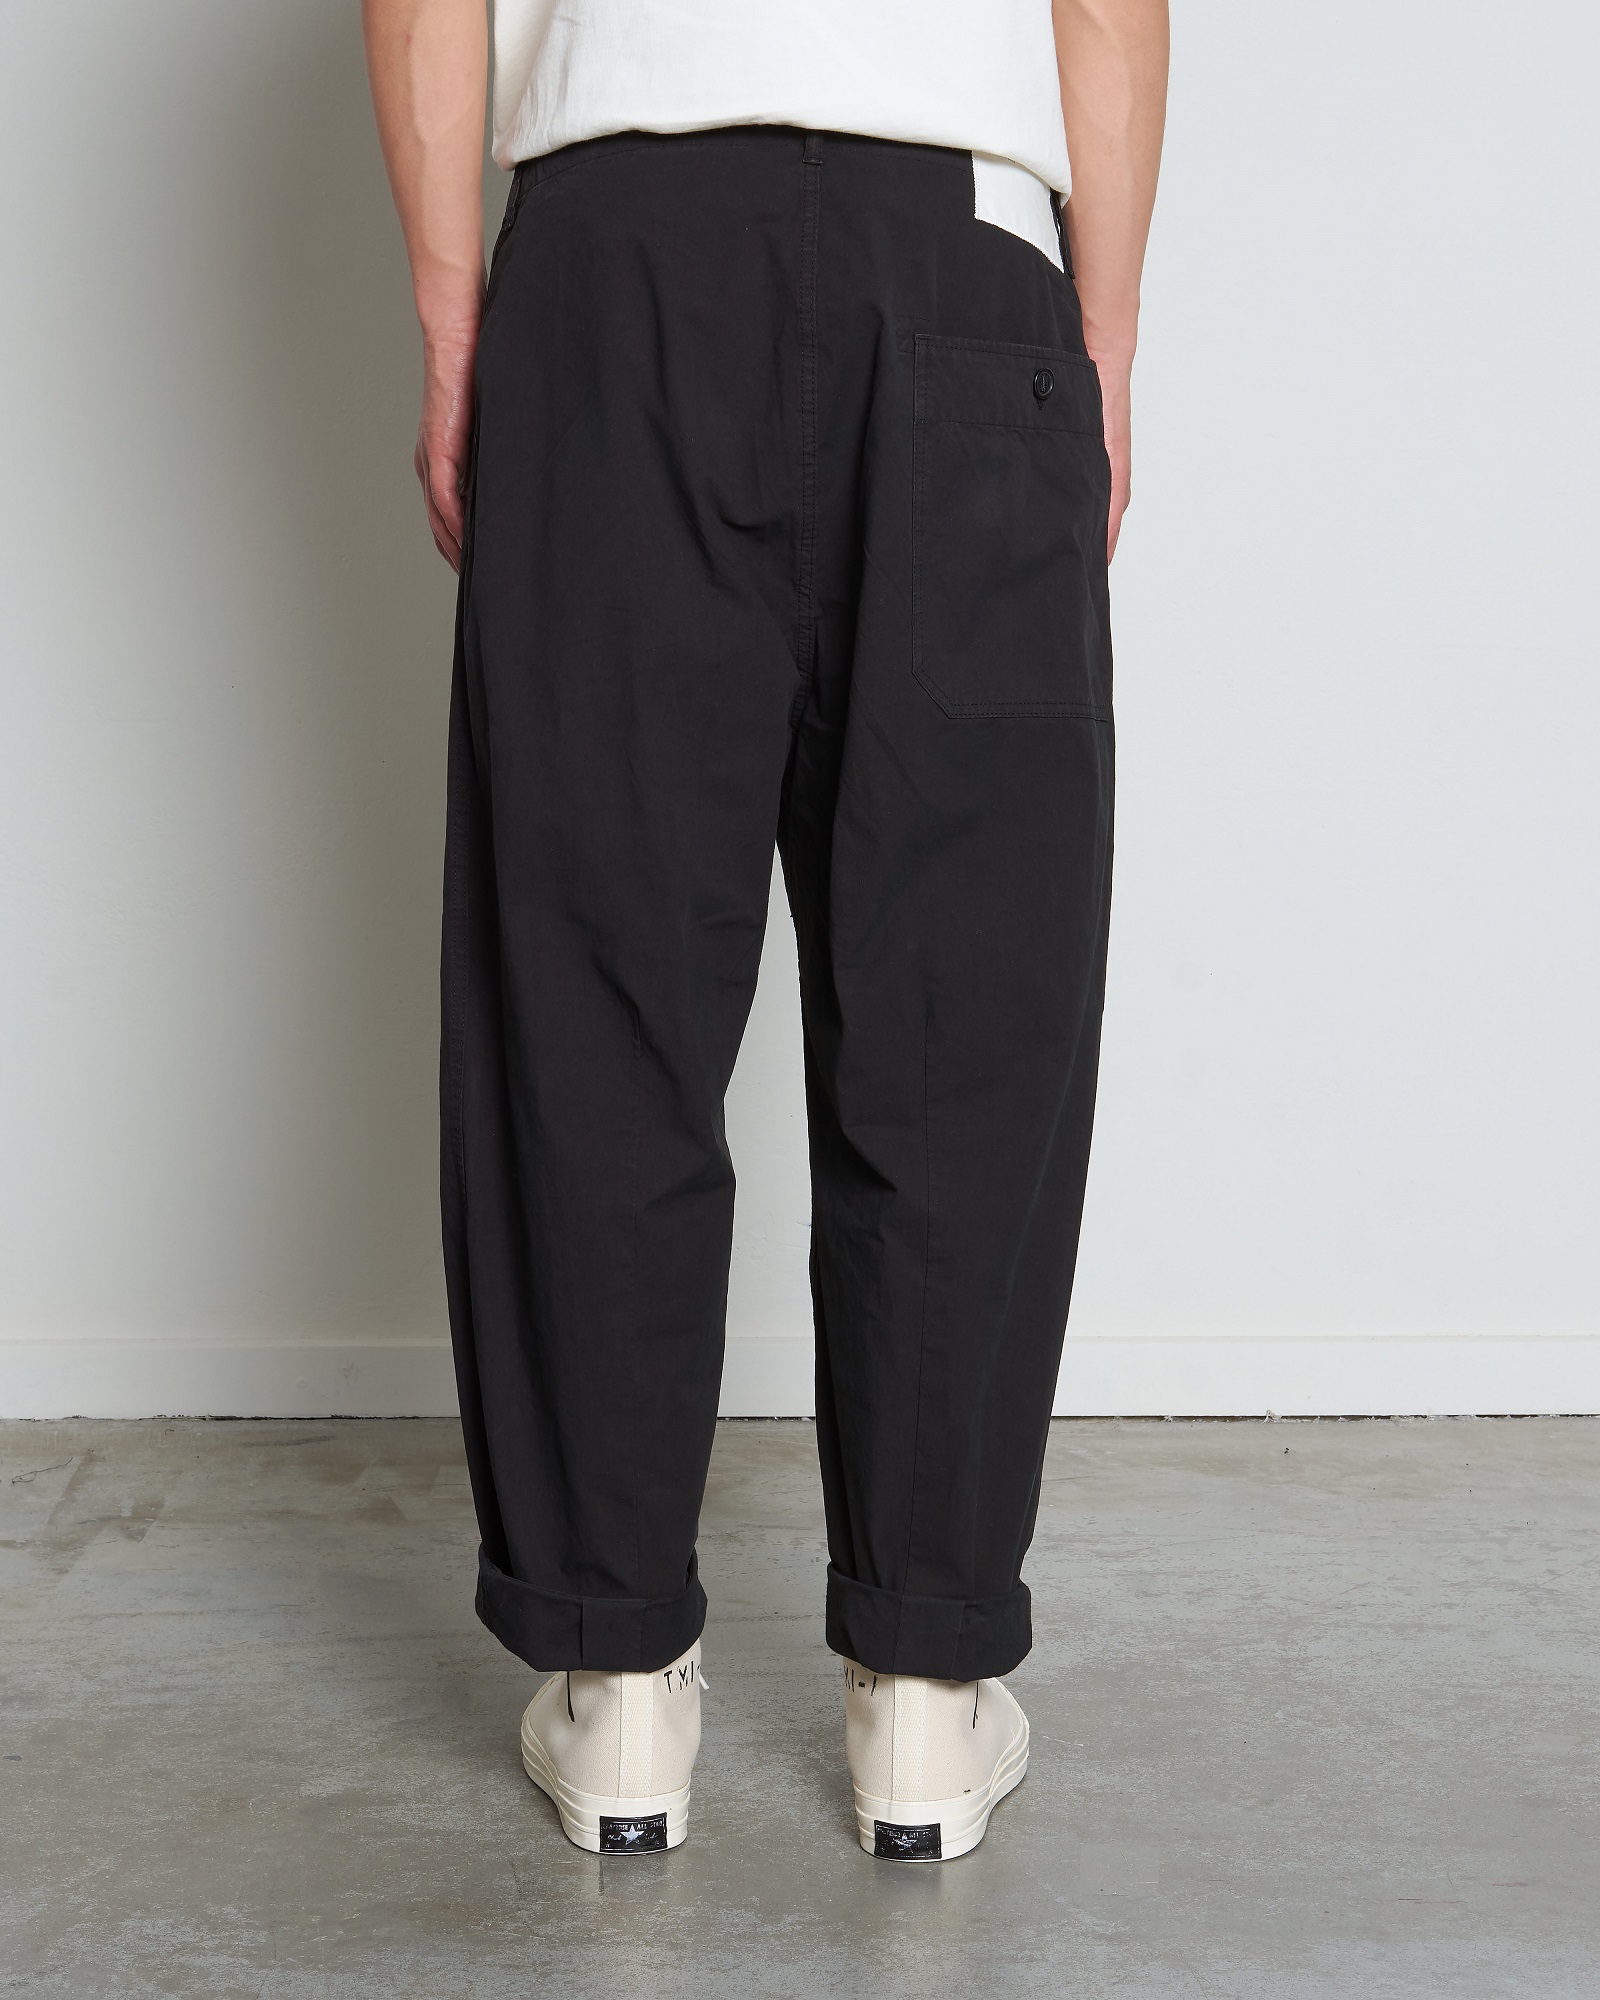 APPLIED ART FORMS Japanese Cargo Pant in Black